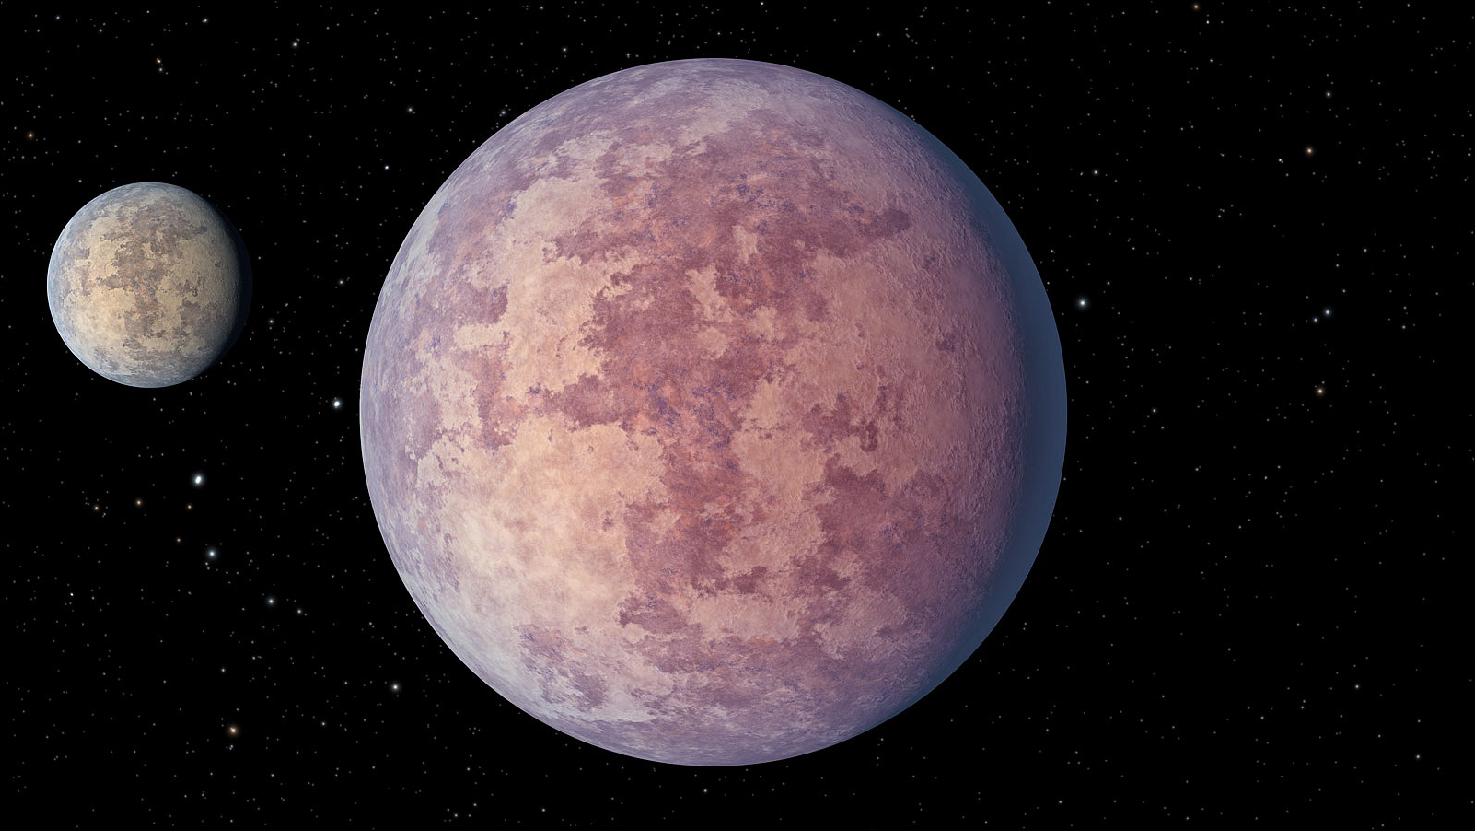 Figure 10: Illustration of two newly discovered, rocky "super-Earths" that could be ideal for follow-up atmospheric observations (image credit: NASA/JPL-Caltech)